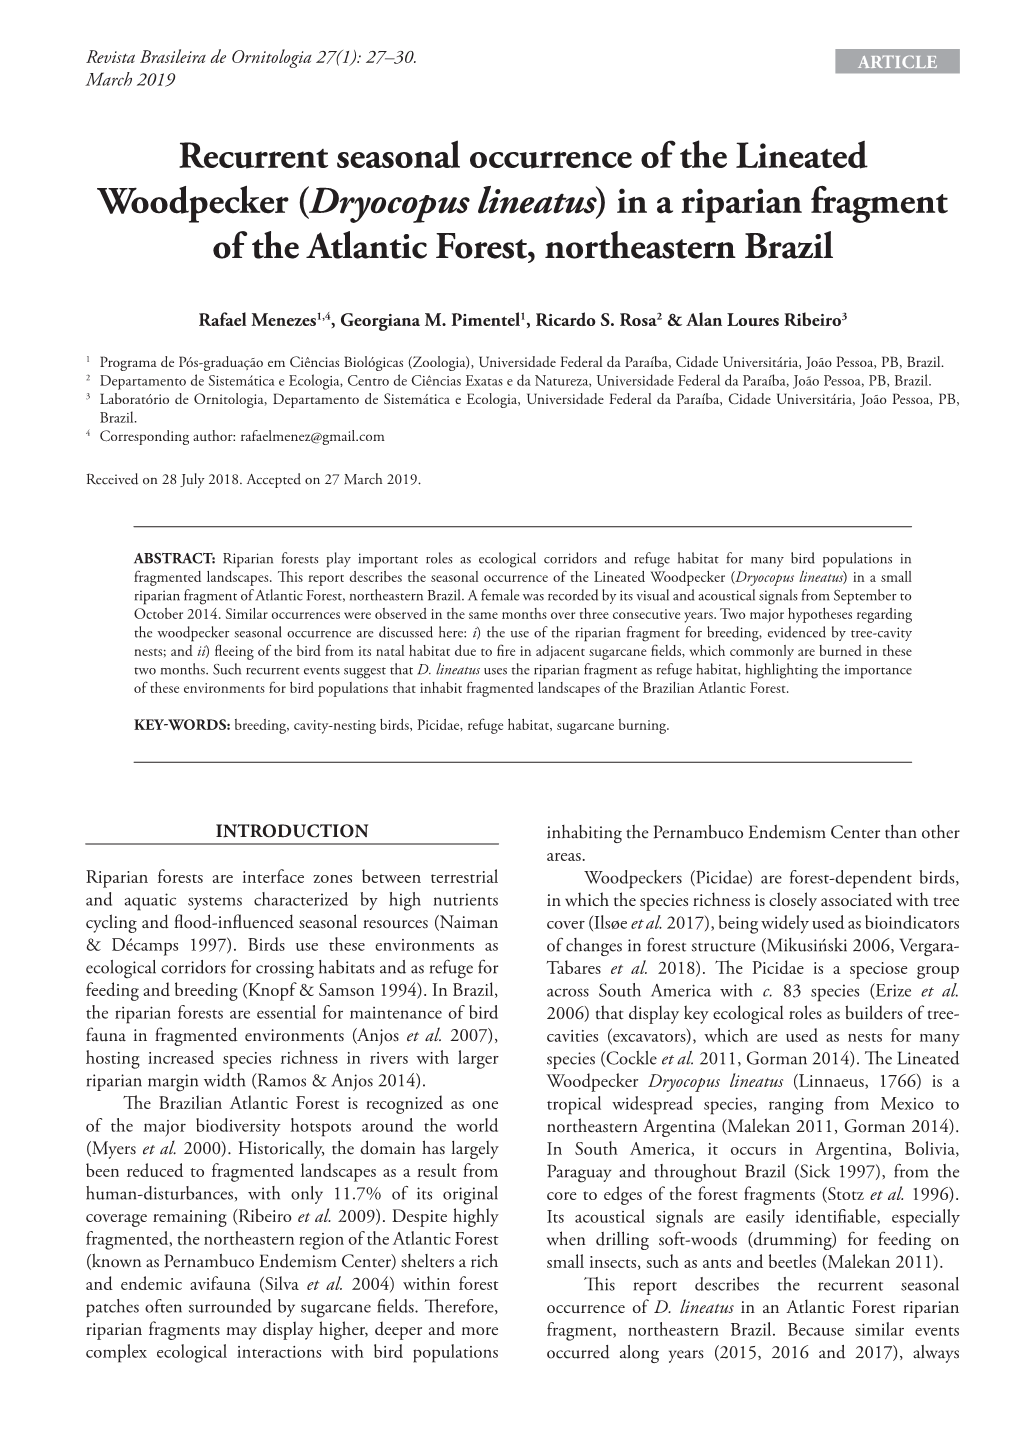 Recurrent Seasonal Occurrence of the Lineated Woodpecker (Dryocopus Lineatus) in a Riparian Fragment of the Atlantic Forest, Northeastern Brazil